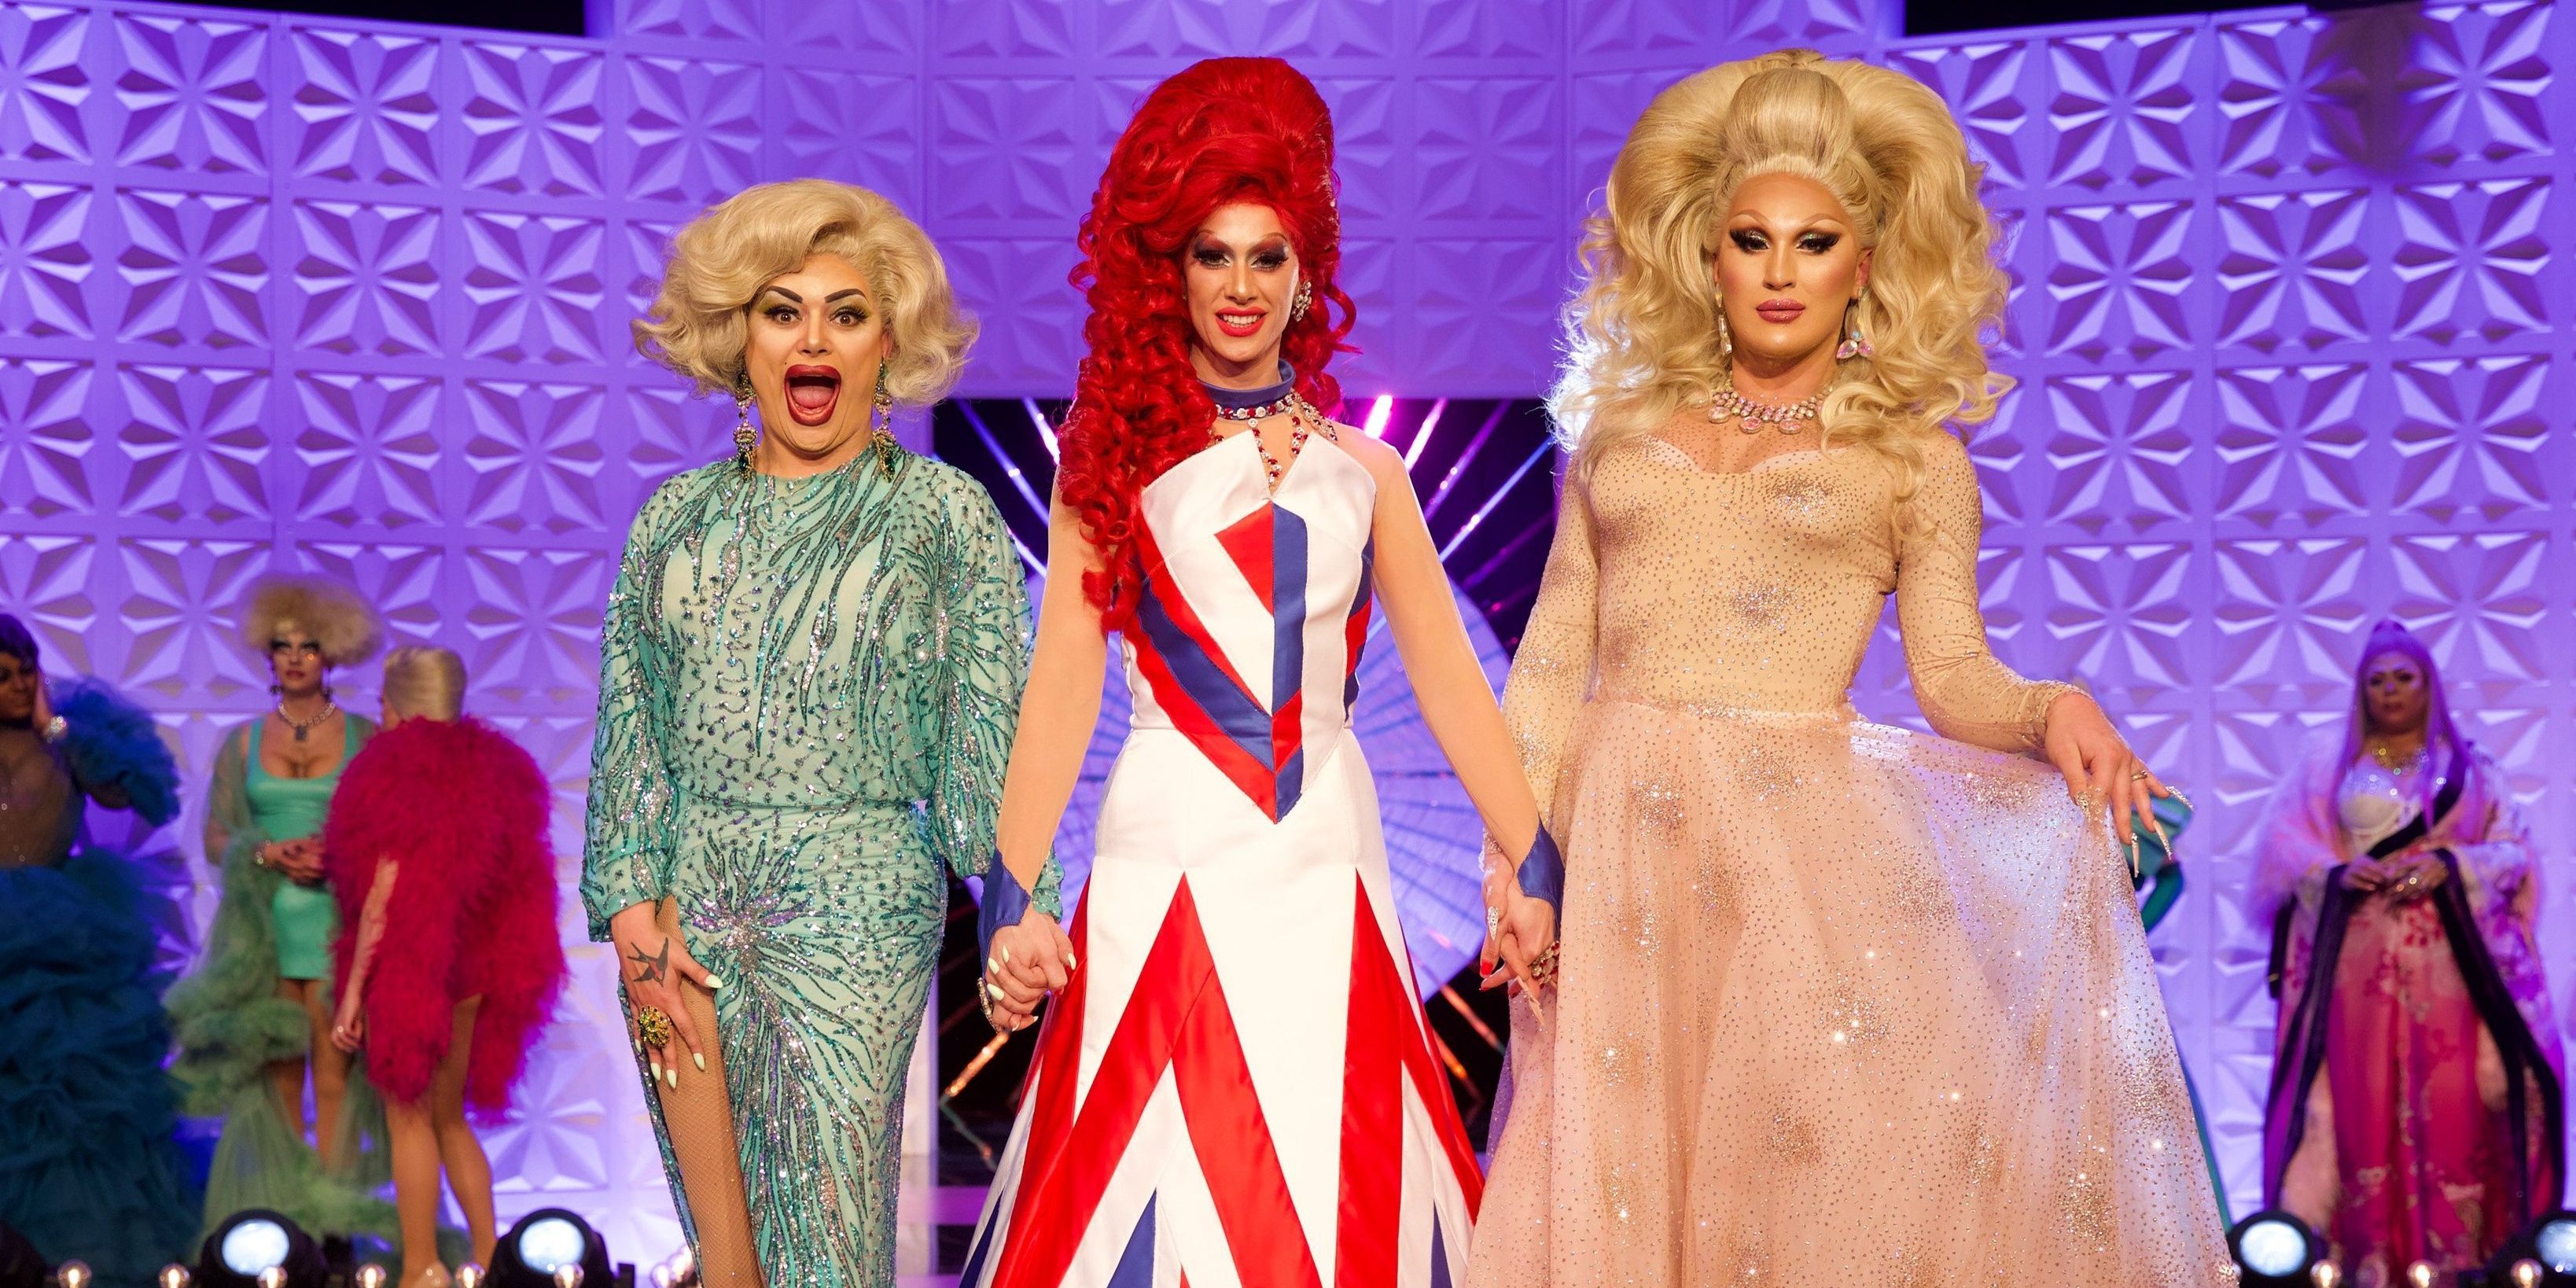 Baga Chipz, Divina De Campo and The Vivienne on RuPaul's Drag Race UK Cropped